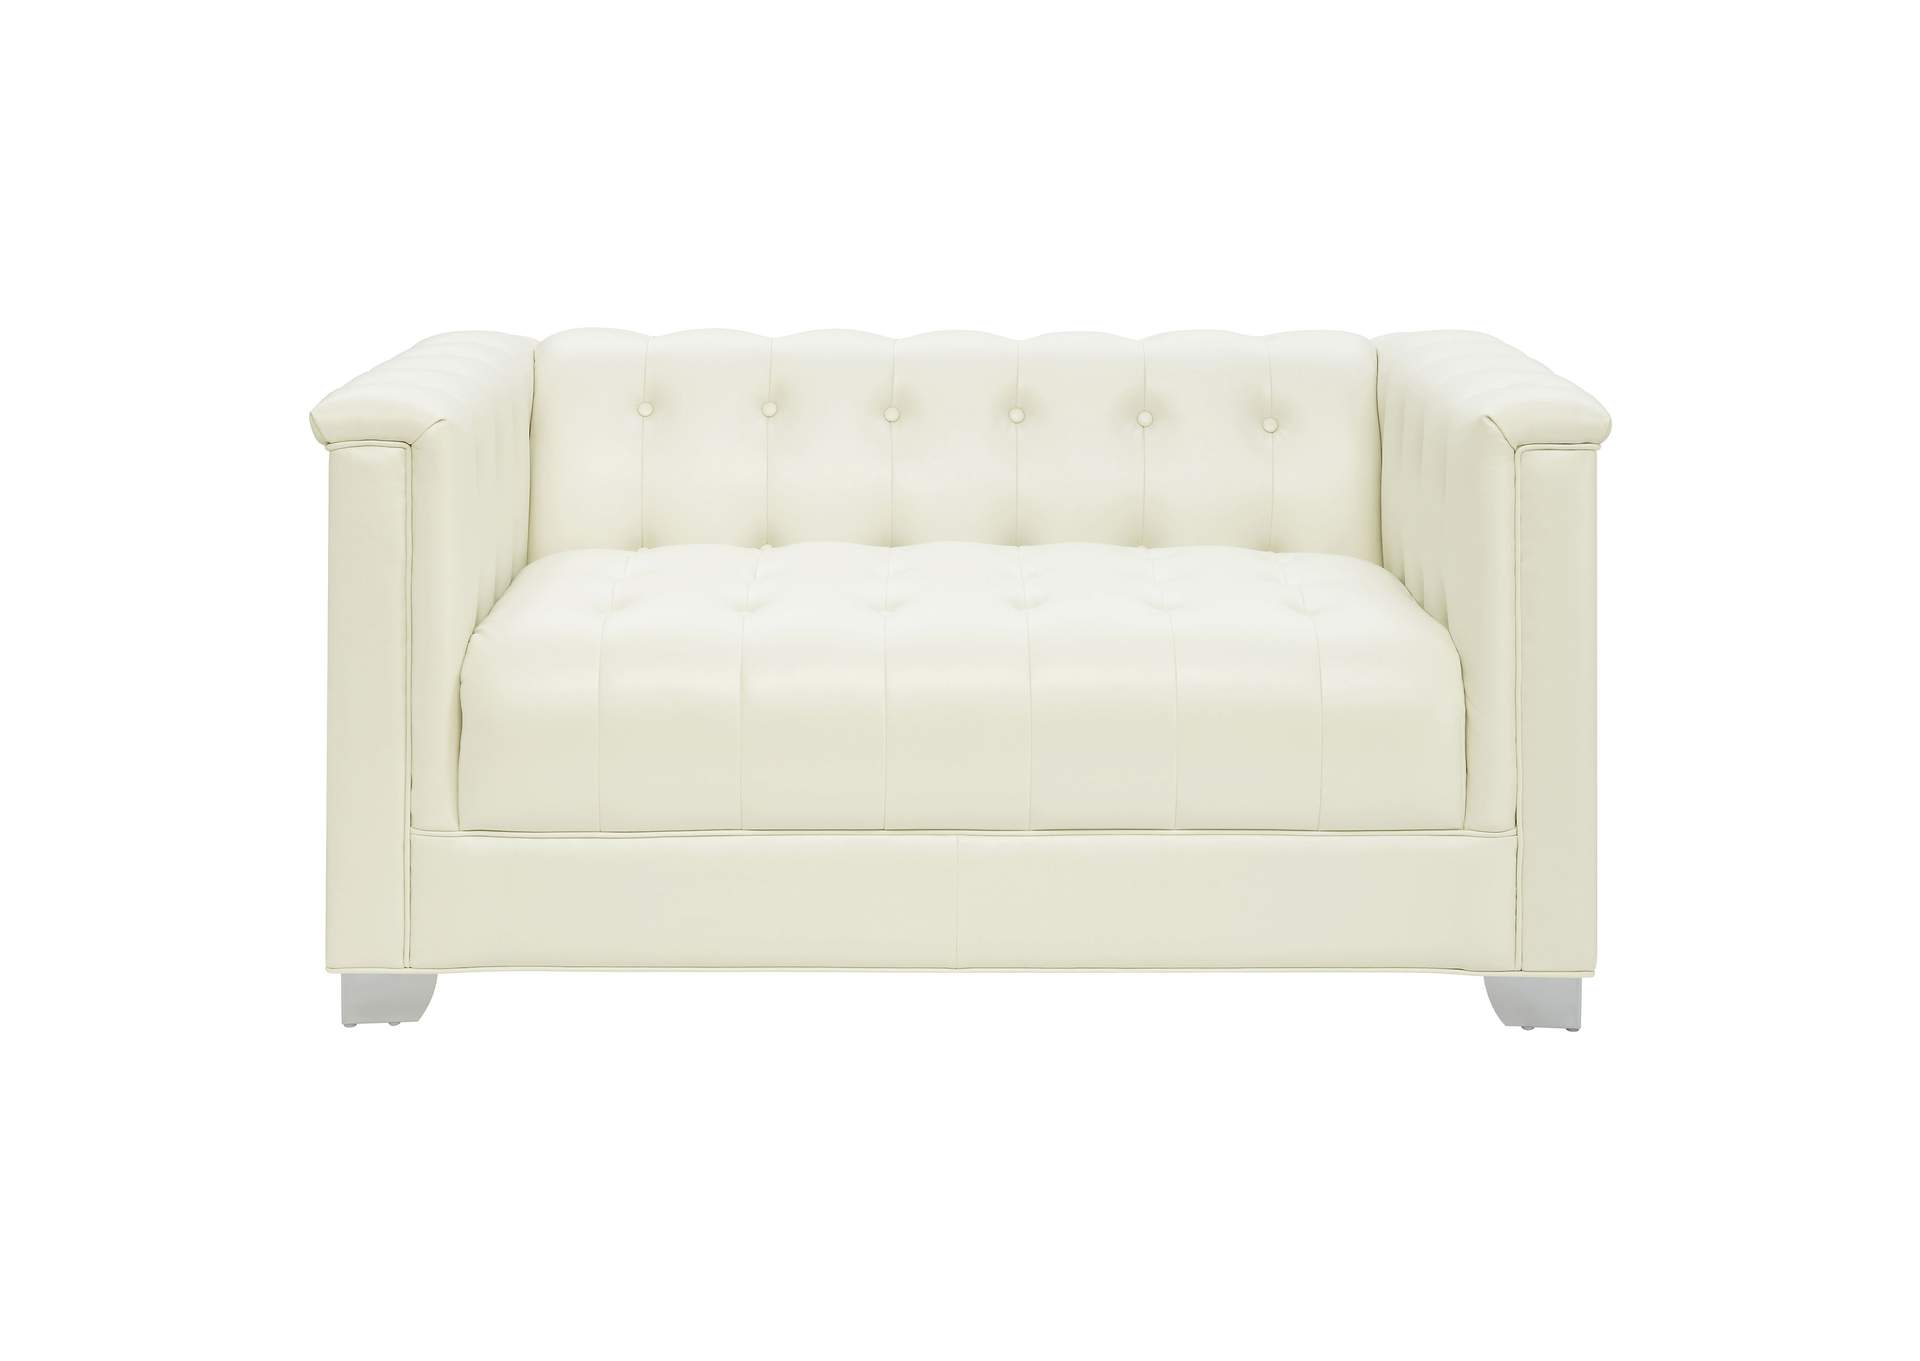 Chaviano Upholstered Tufted Living Room Set Pearl White,Coaster Furniture